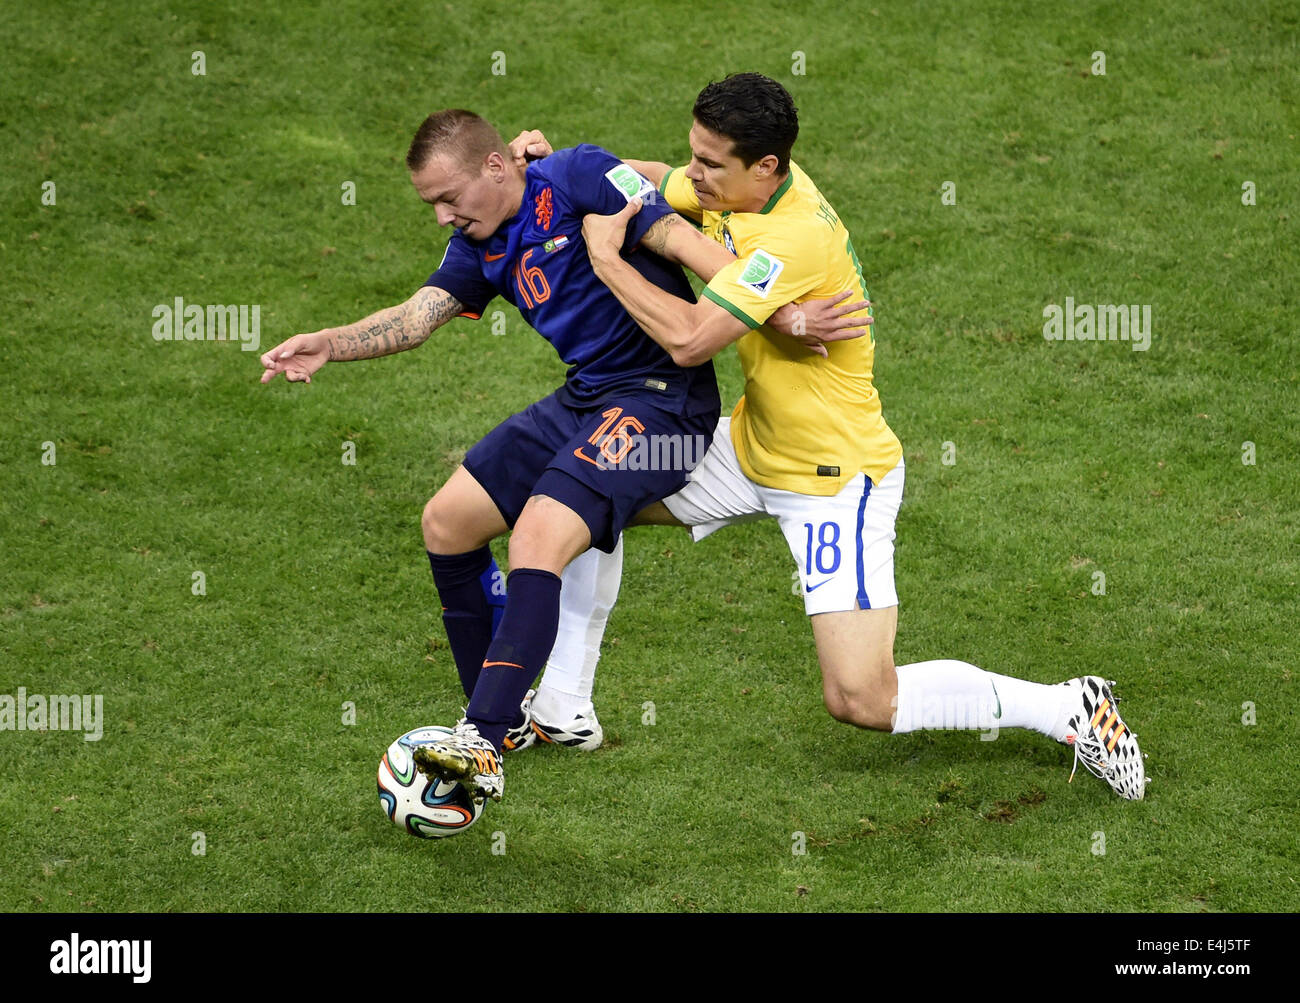 Brasilia, Brazil. 12th July, 2014. Netherlands' Jordy Clasie (L) controls the ball against Brazil's Hernanes during the third place play-off match between Brazil and Netherlands of 2014 FIFA World Cup at the Estadio Nacional Stadium in Brasilia, Brazil, on July 12, 2014. Netherlands won 3-0 over Brazil and took the third place of the tournament on Saturday. Credit:  Lui Siu Wai/Xinhua/Alamy Live News Stock Photo